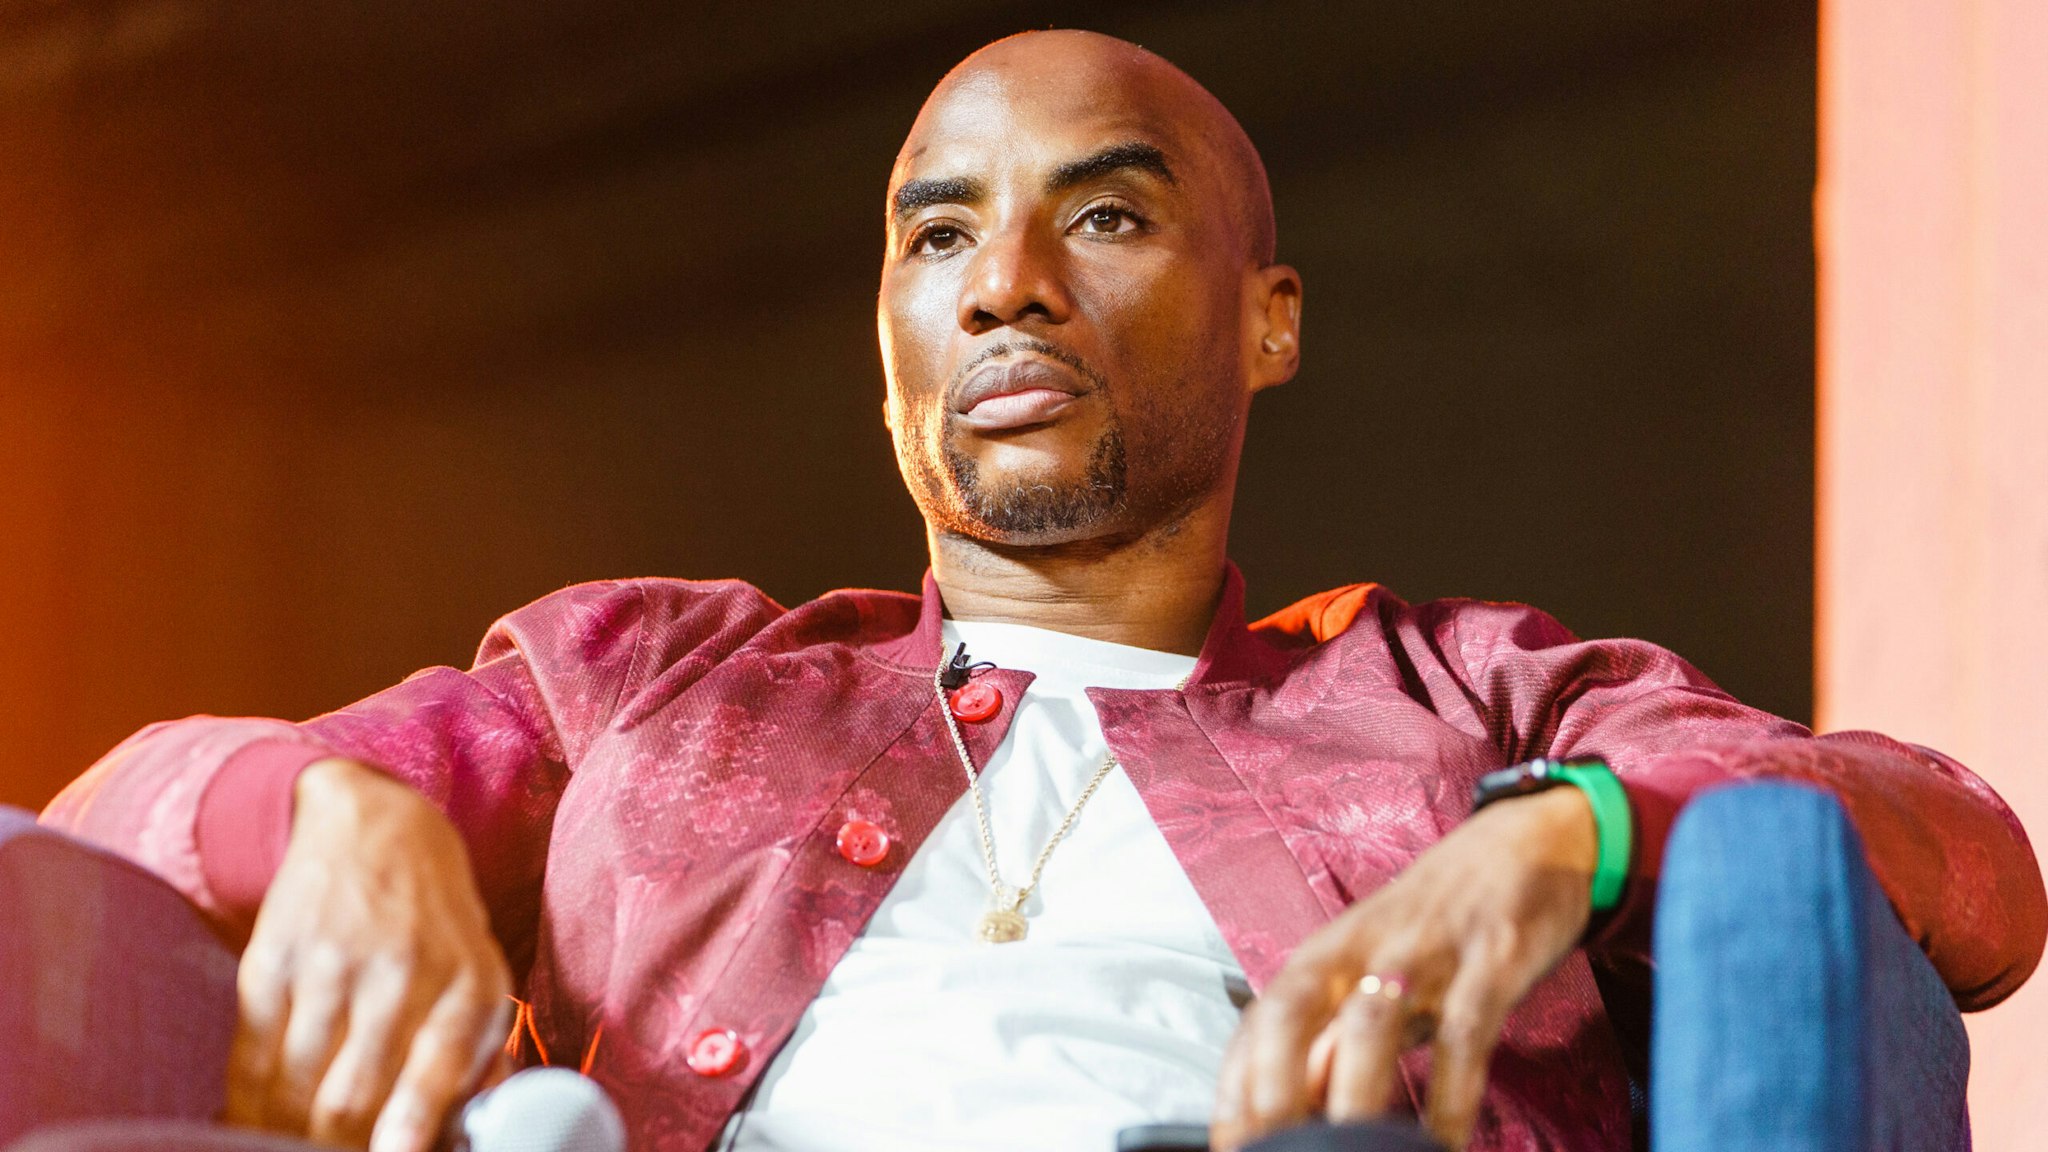 ATLANTA, GA - SEPTEMBER 09: Charlamagne tha God is seen during a campaign event and conversation with Stacey Abrams, 21 Savage, and Francys Johnson at The HBUC on September 9, 2022 in Atlanta, Georgia.